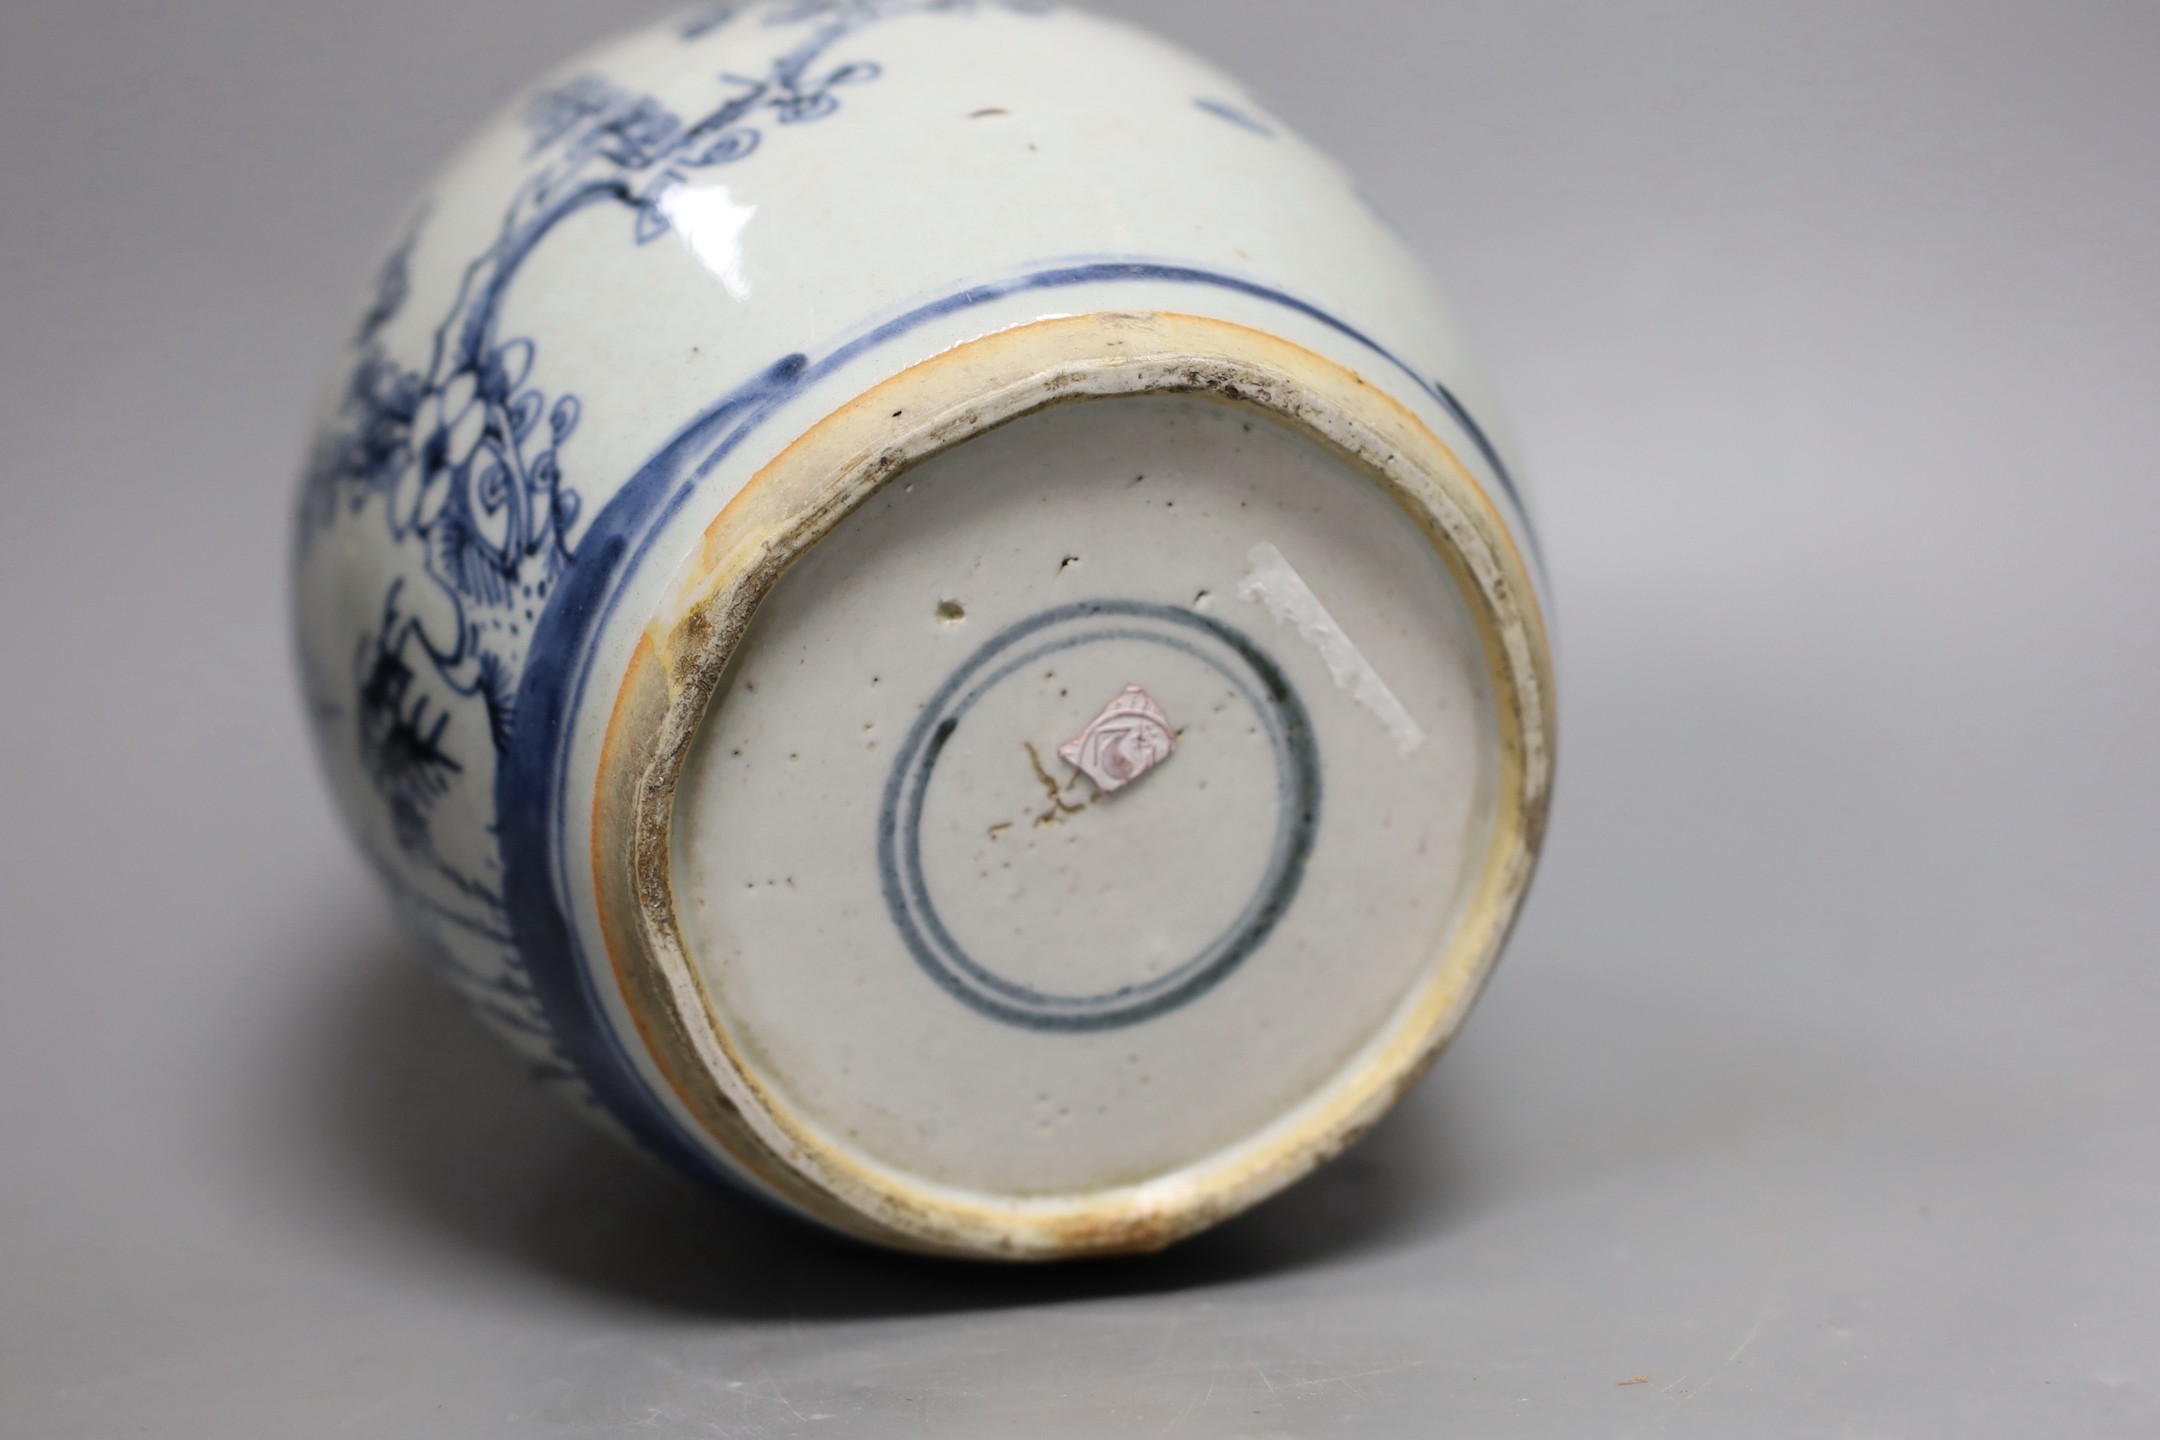 An 18th century Chinese blue and white ‘Three Friends’ jar, 19cm